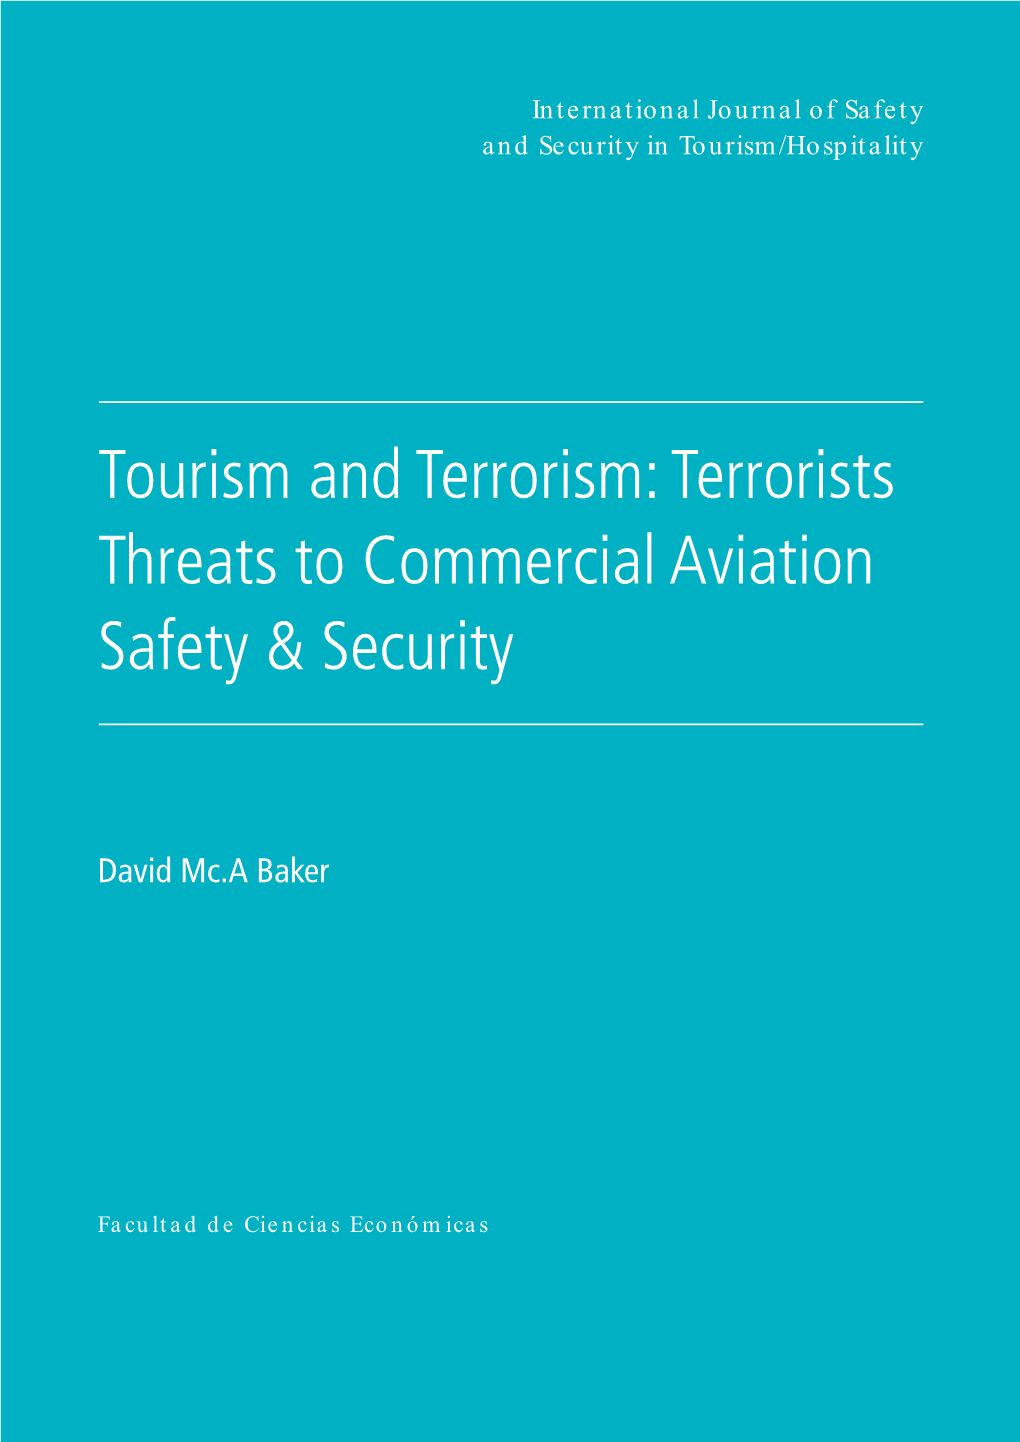 Tourism and Terrorism: Terrorists Threats to Commercial Aviation Safety & Security